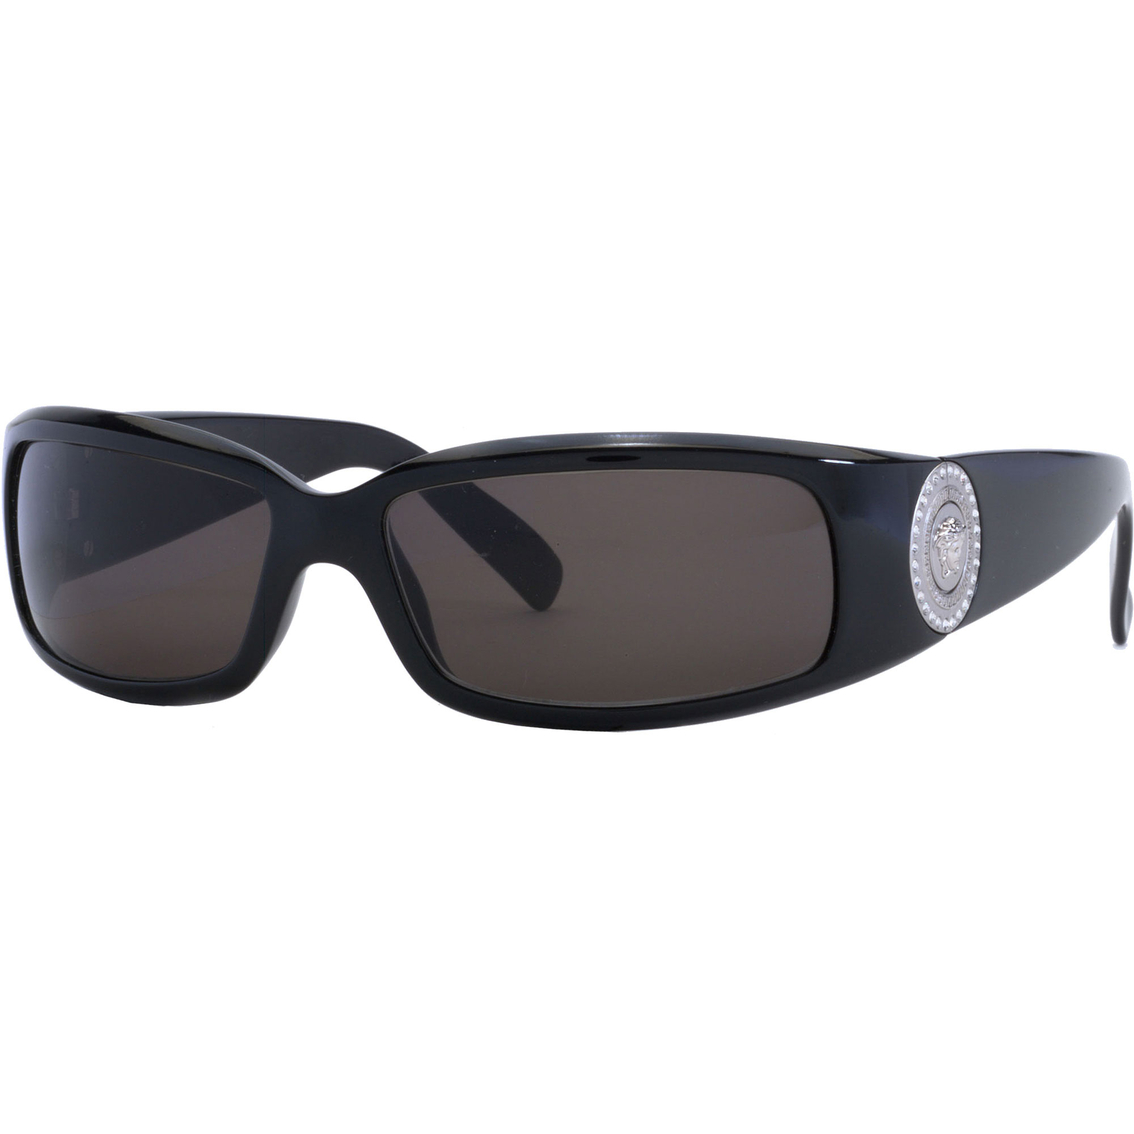 Versace Very Collection Wrap With Silver Crest Sunglasses | Women's ...